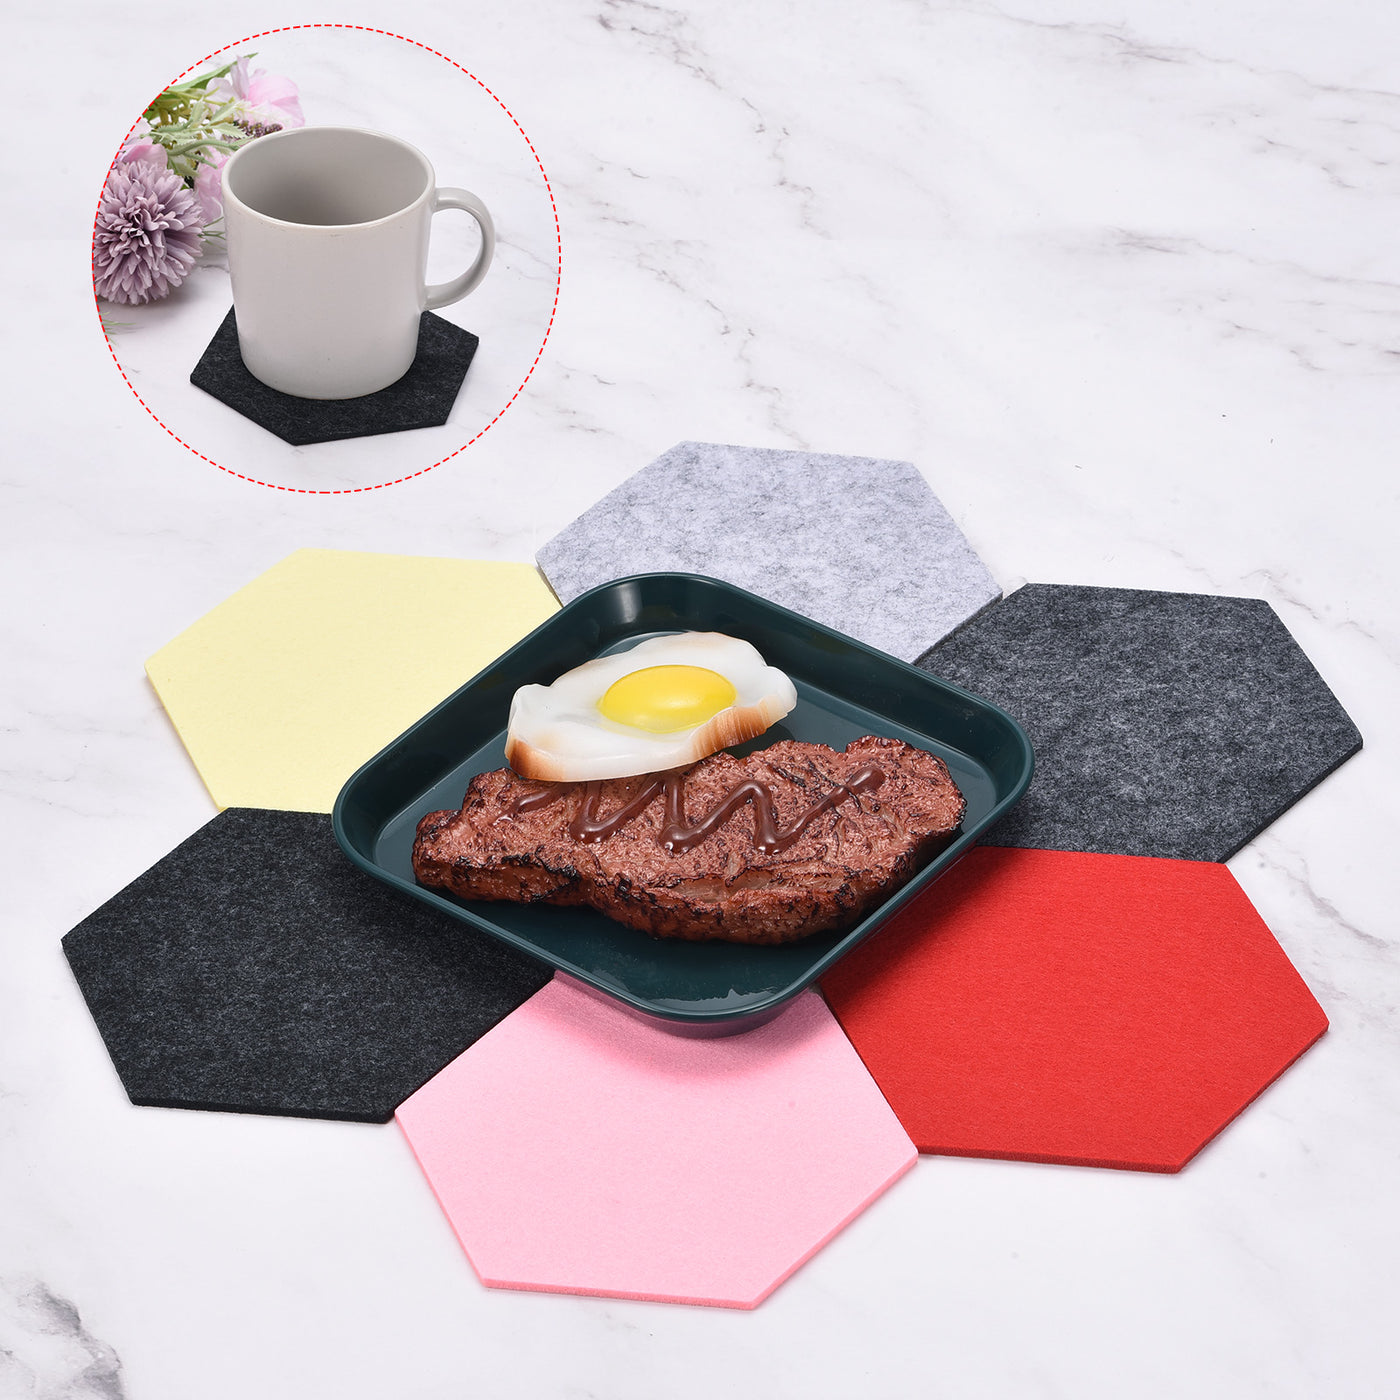 uxcell Uxcell Felt Coasters 4pcs Absorbent Pad Coaster for Drink Cup Pot Bowl Vase Yellow